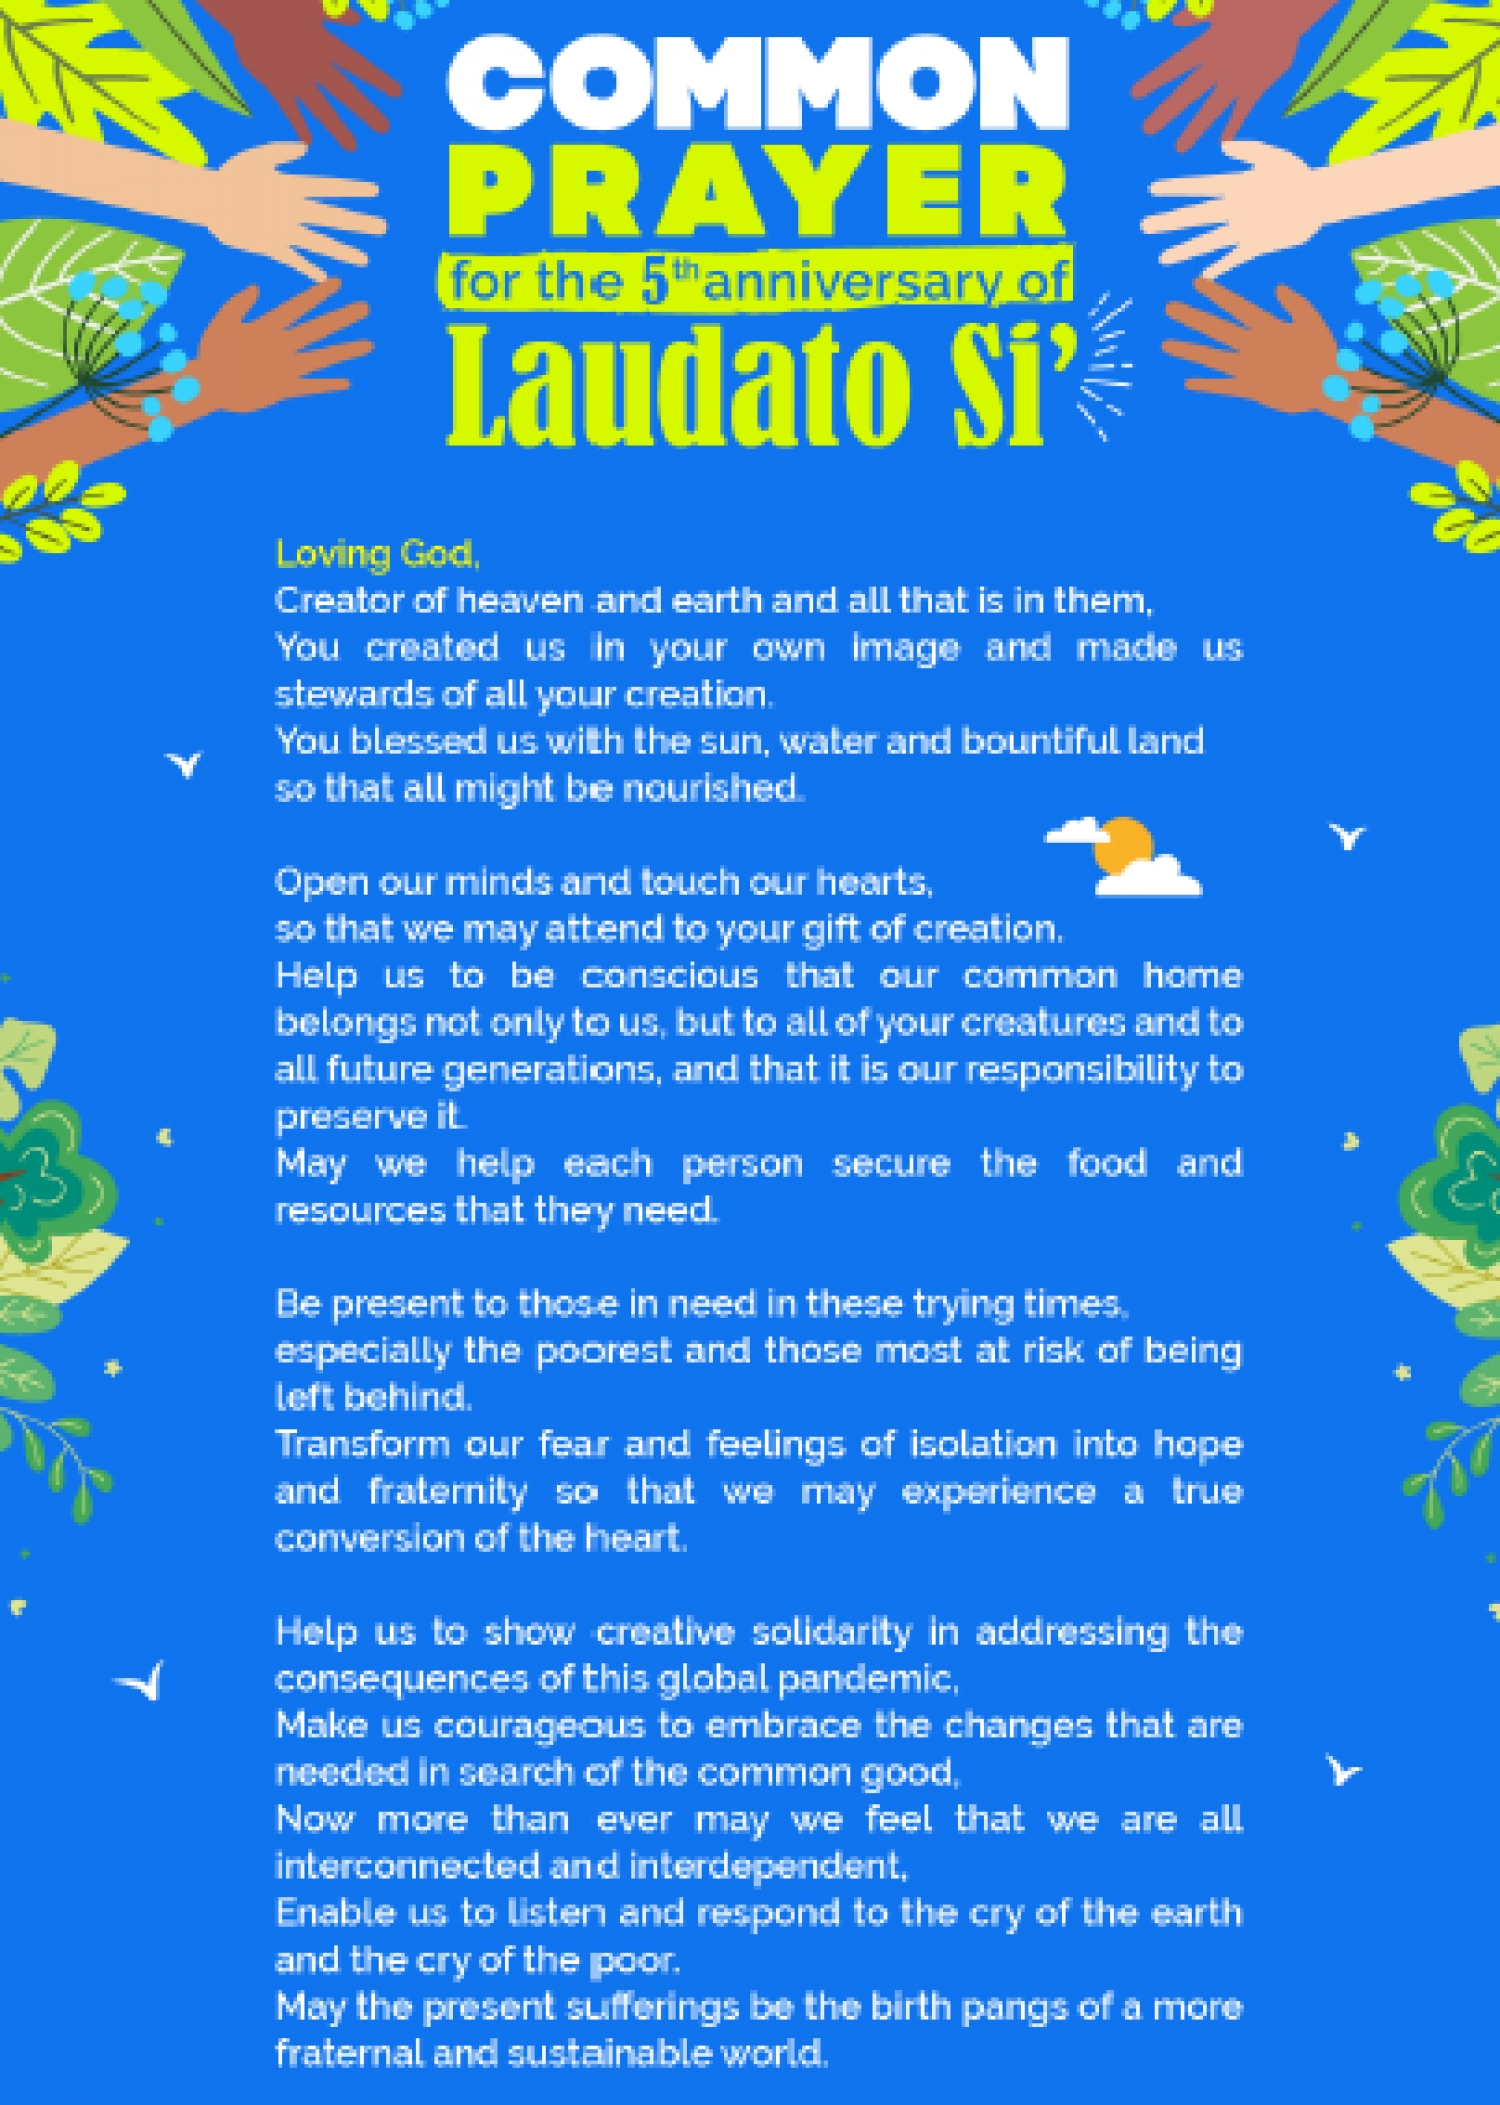 Common Prayer for the  5th anniversary 24th May 2020 of LAUDATO SI